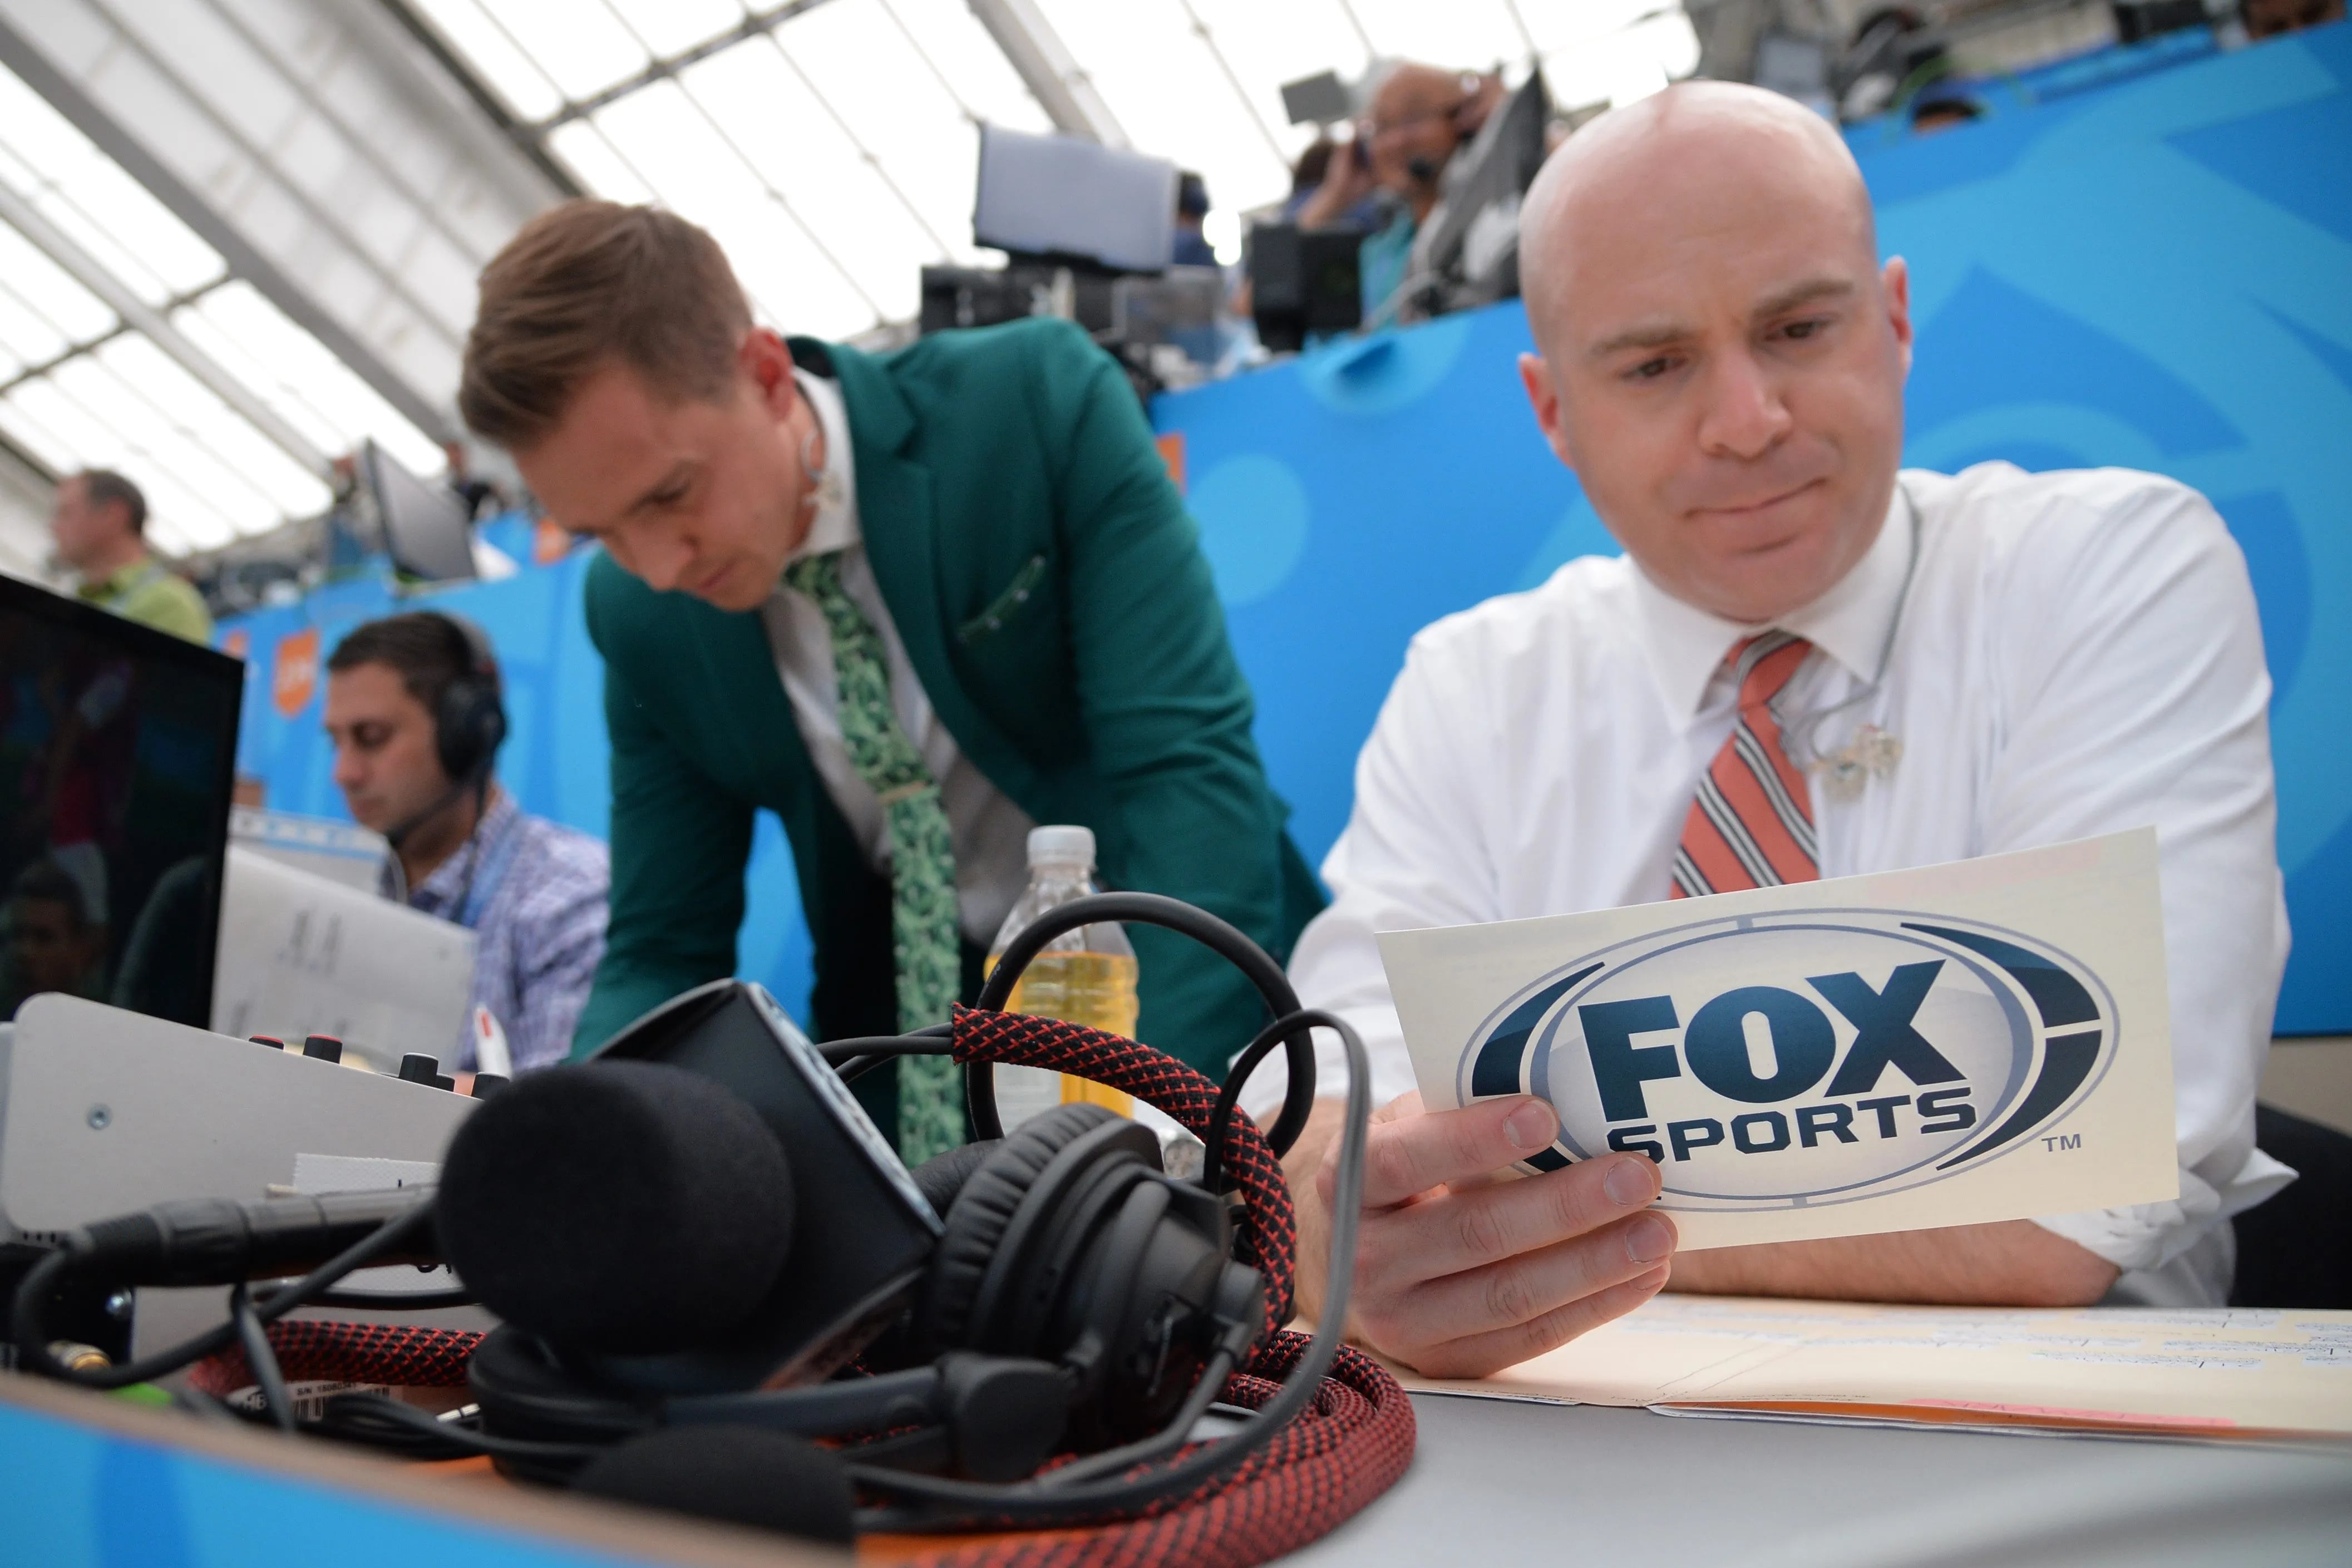 Shaw Brown (left) with Fox soccer broadcasters John Strong (right) and Stuart Holden (center) at the 2018 men's World Cup final.